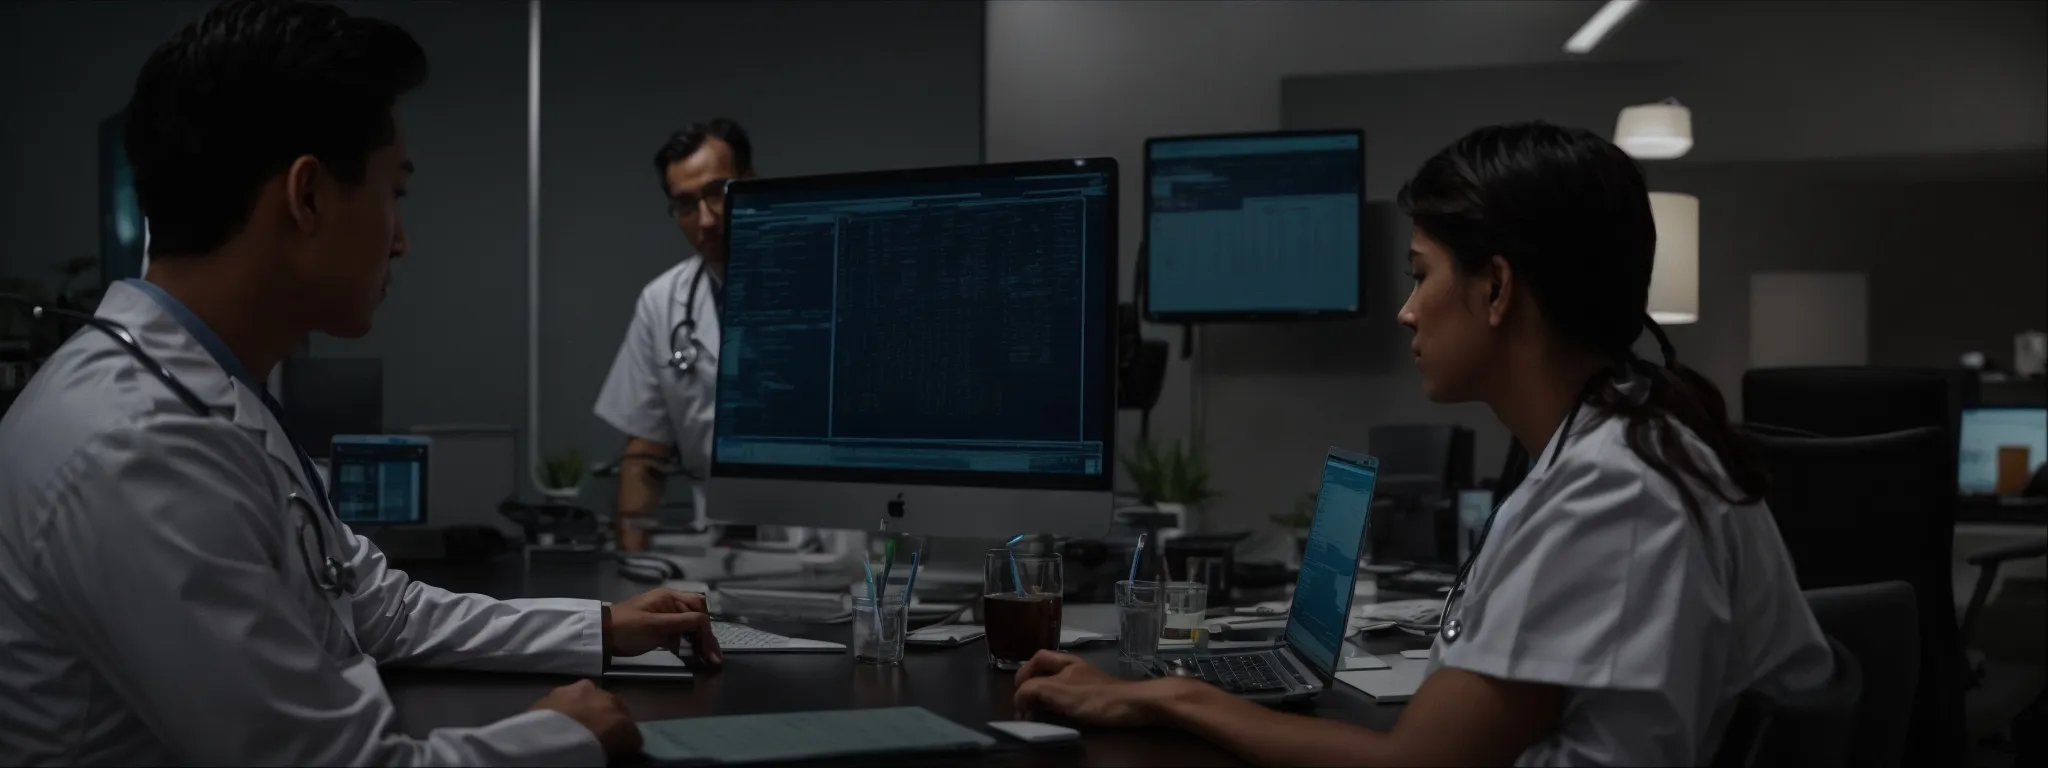 a doctor discussing strategies with a team around a computer in a modern office setting.